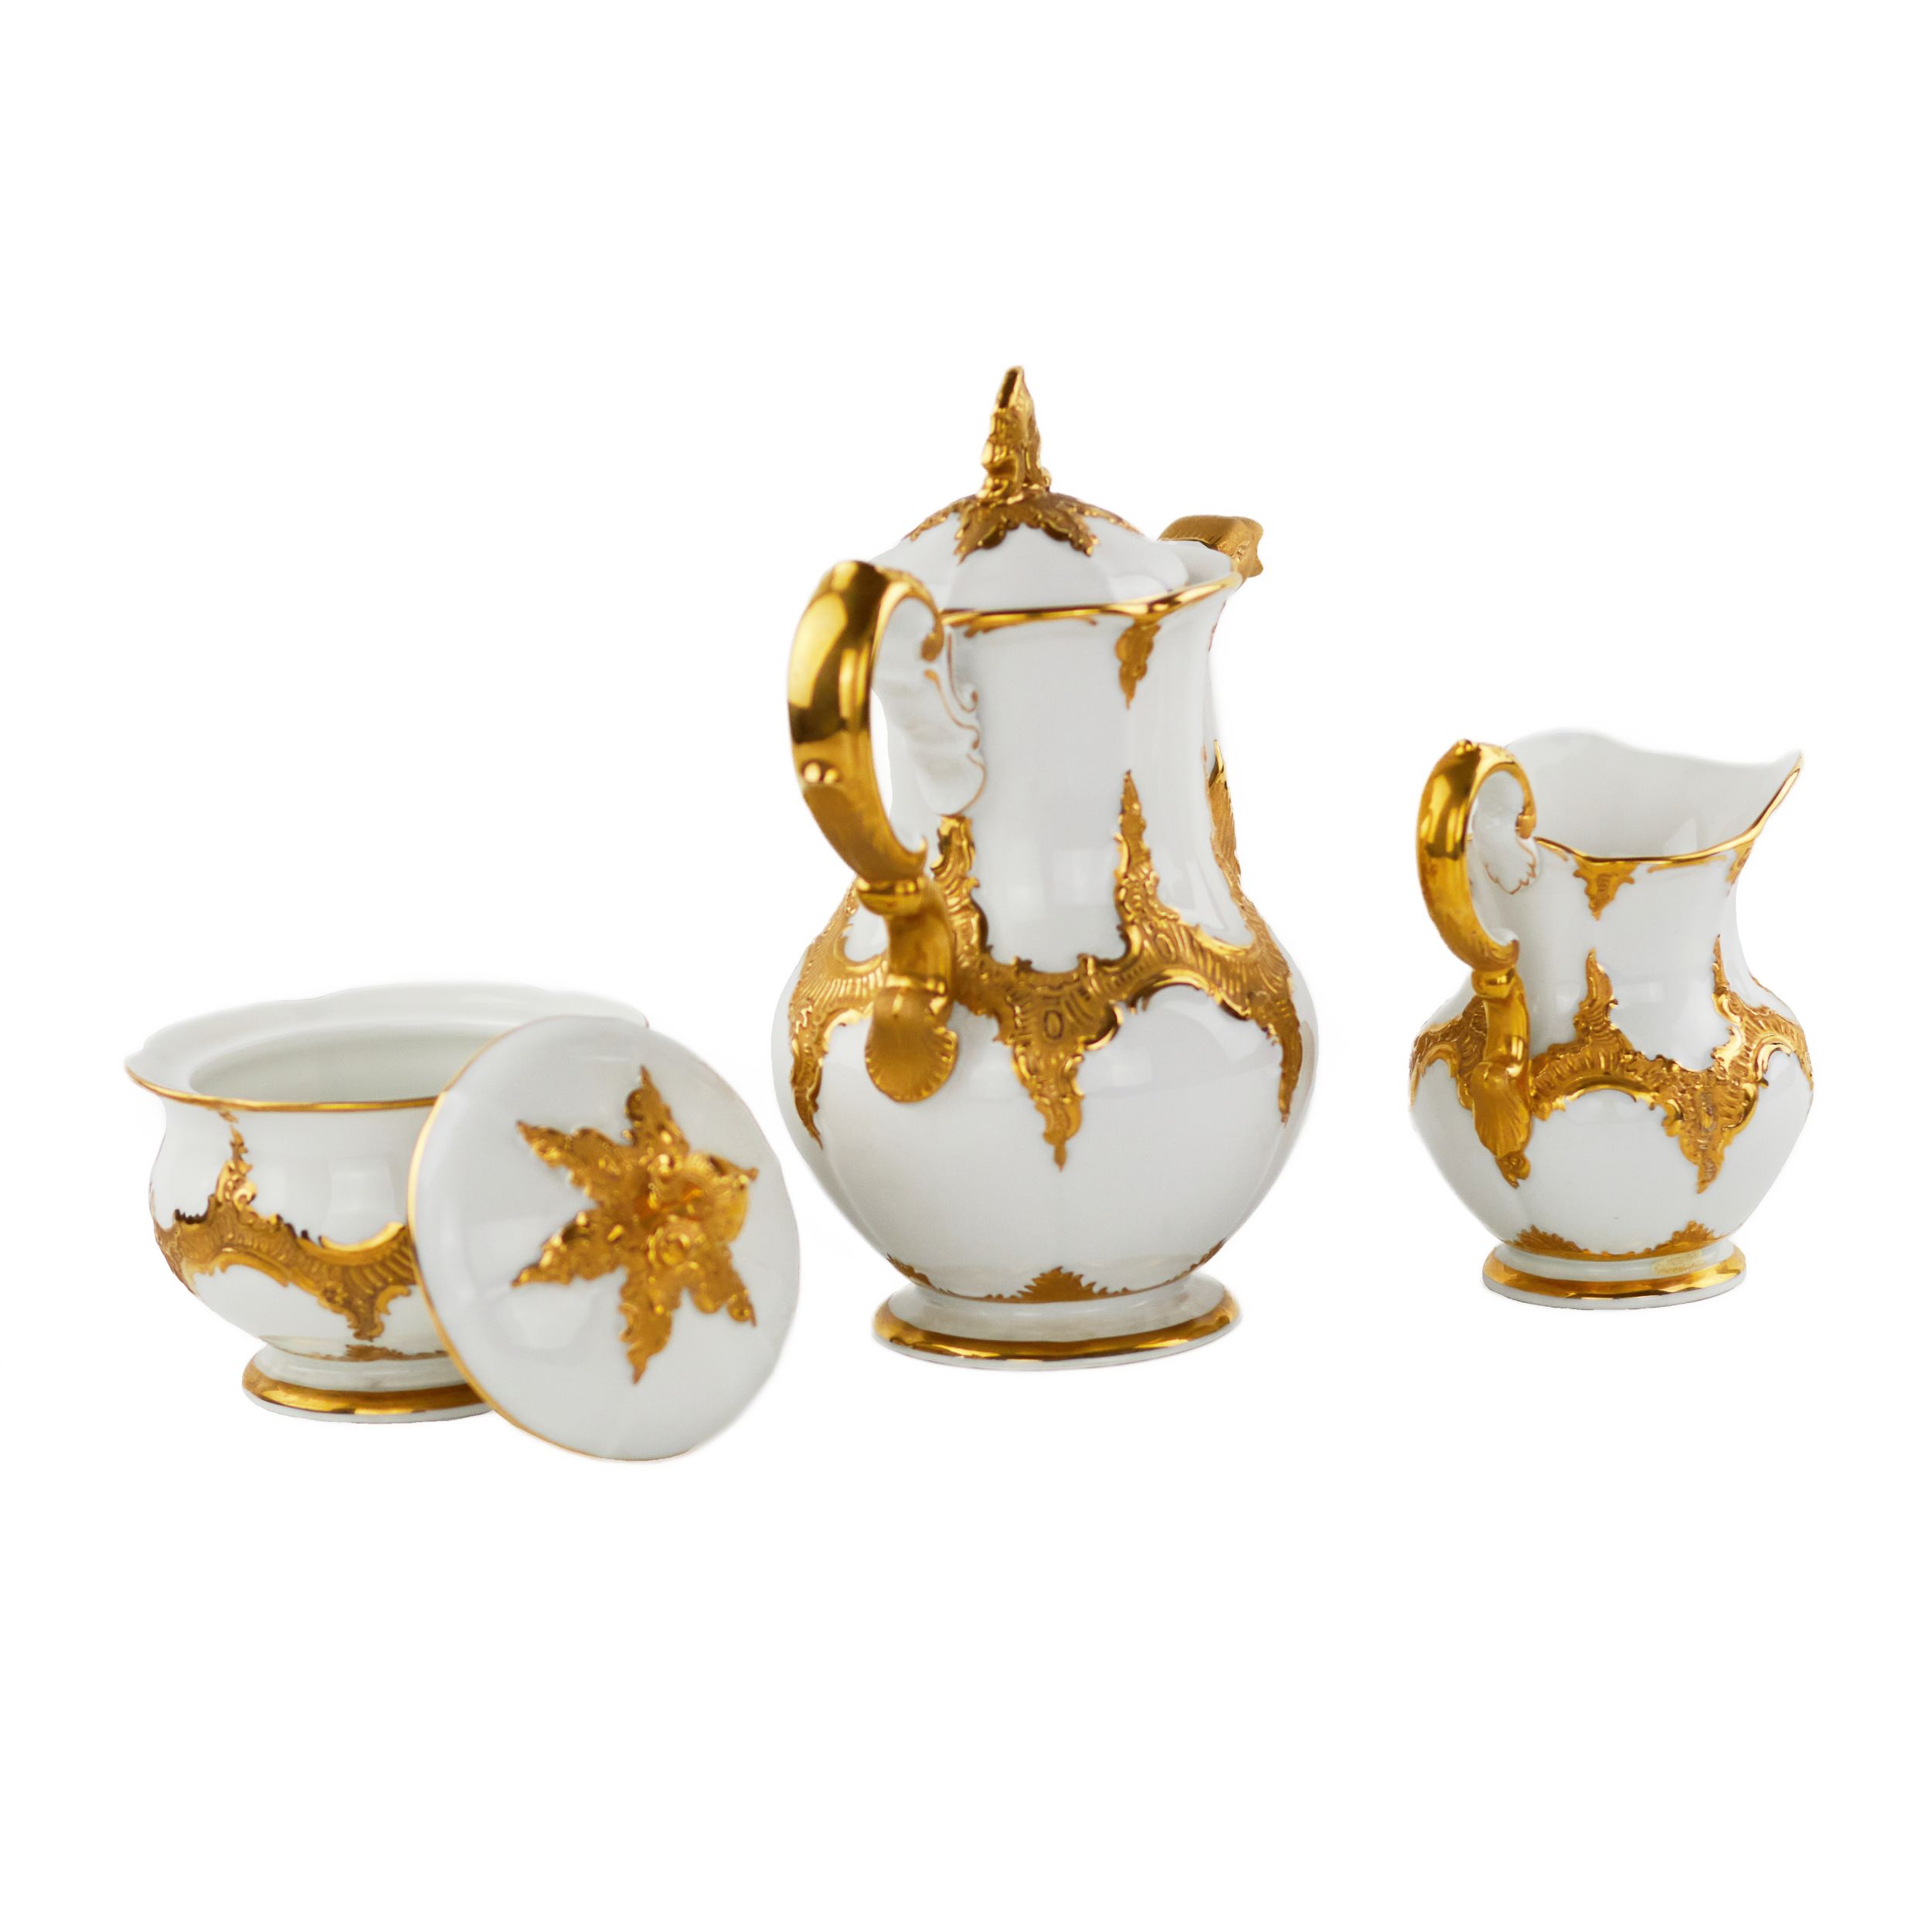 Luxurious mocha service for six people. Meissen. 20th century. - Image 7 of 8